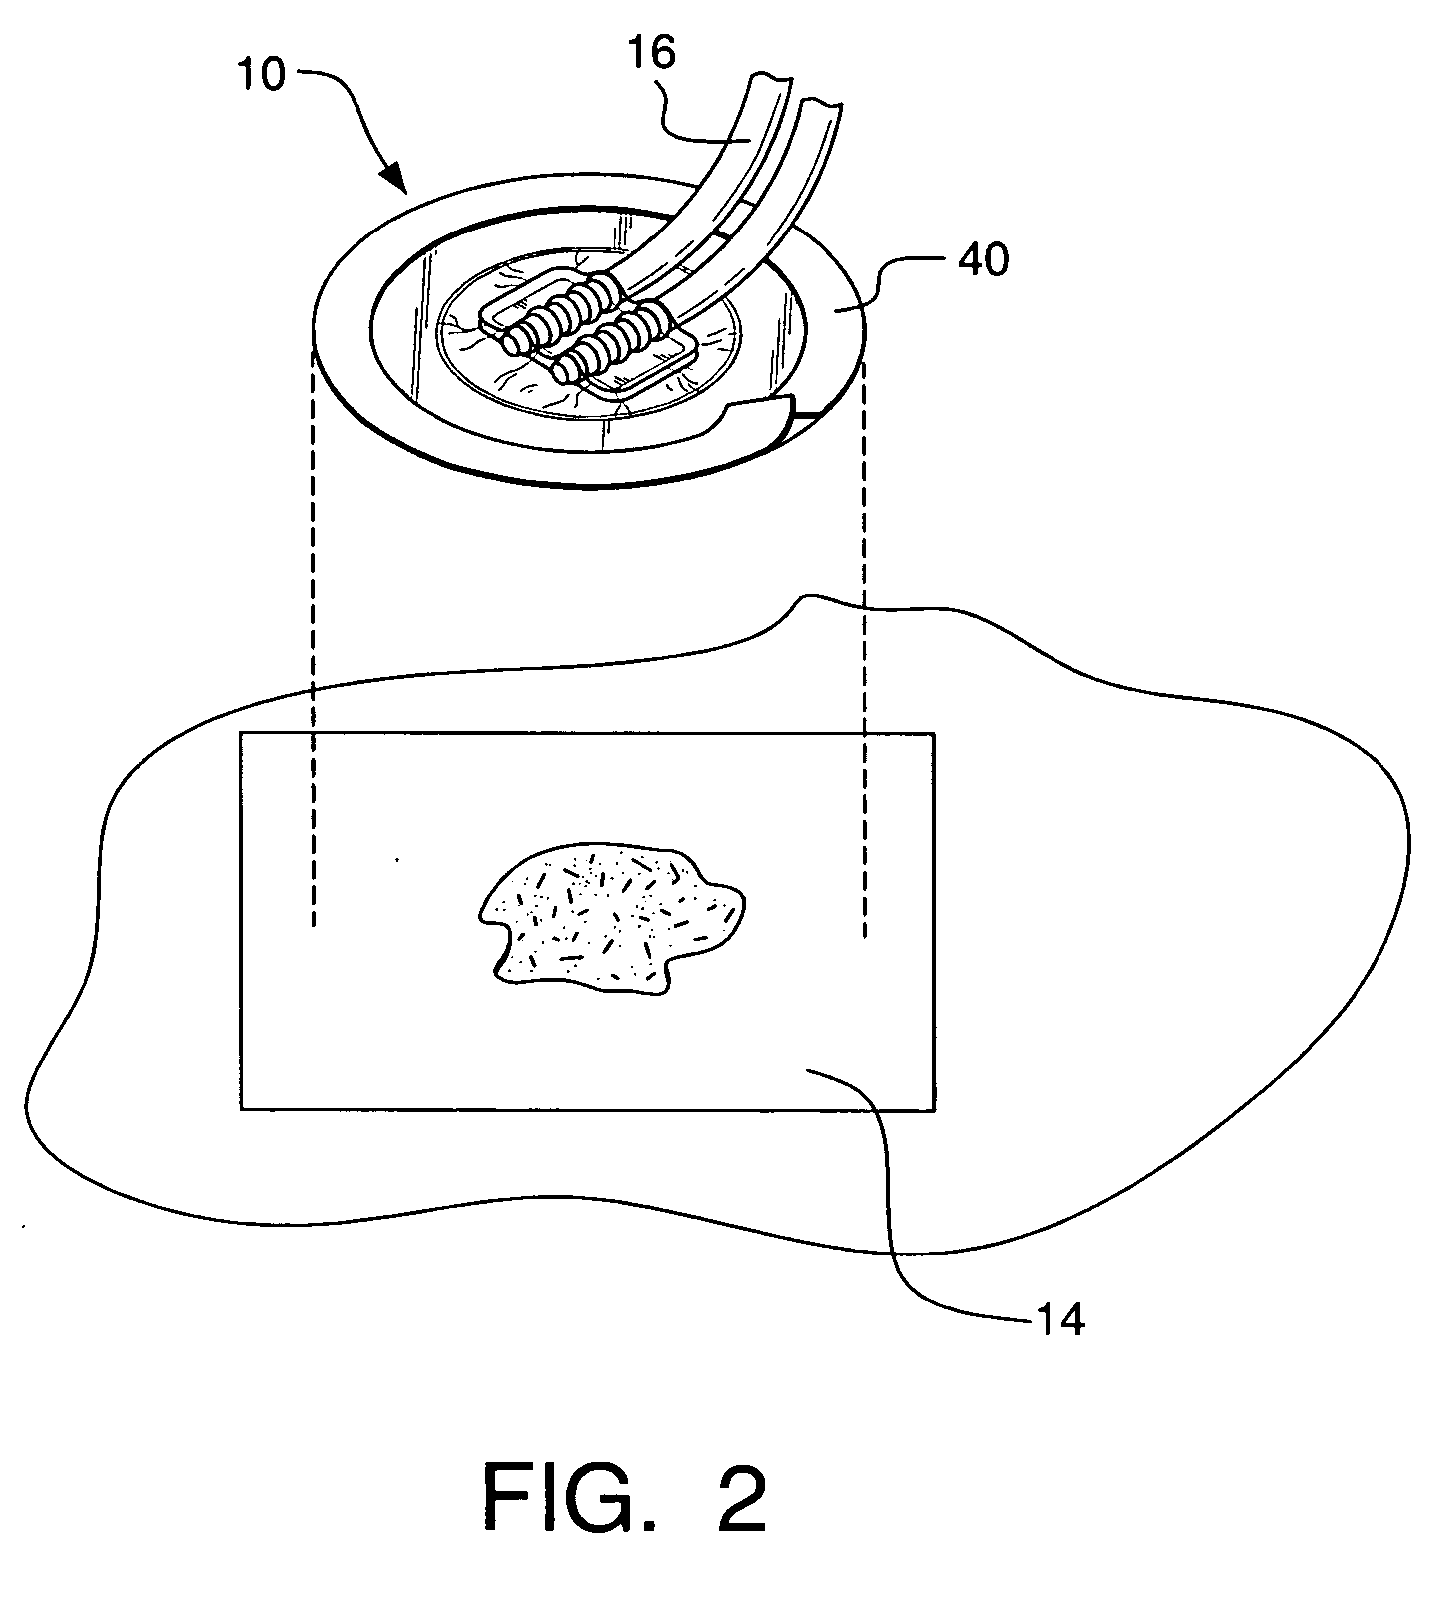 Tube attachment device for wound treatment